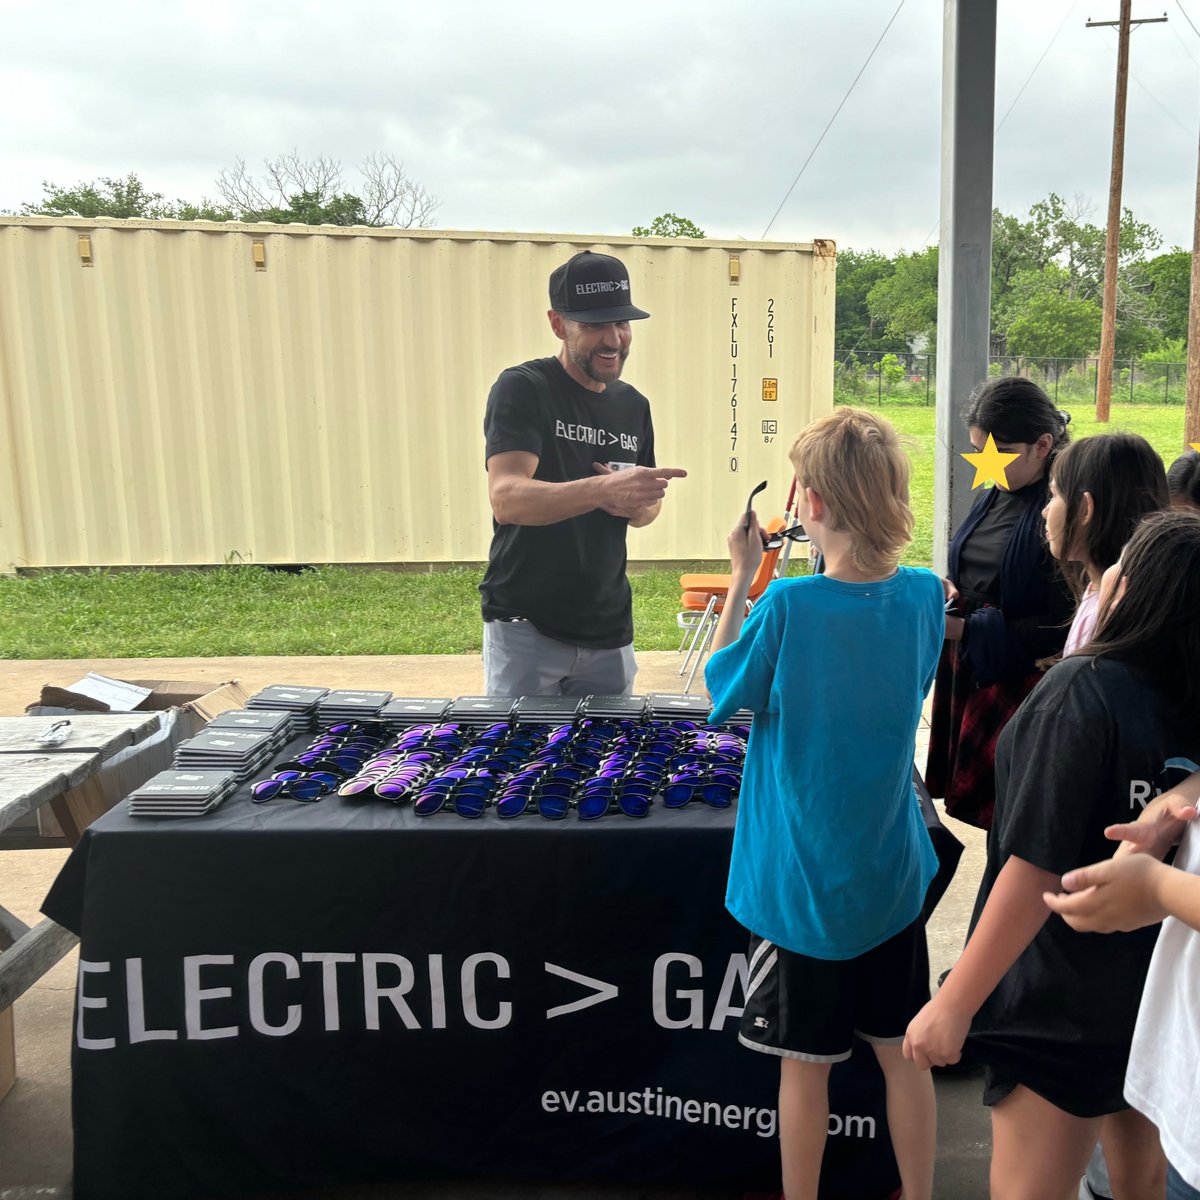 The students were full of energy and thrilled for the opportunity to experience all of this. Plus they got some cool Electric > Gas sunglasses and notepads to take notes on what they were learning about! 📝